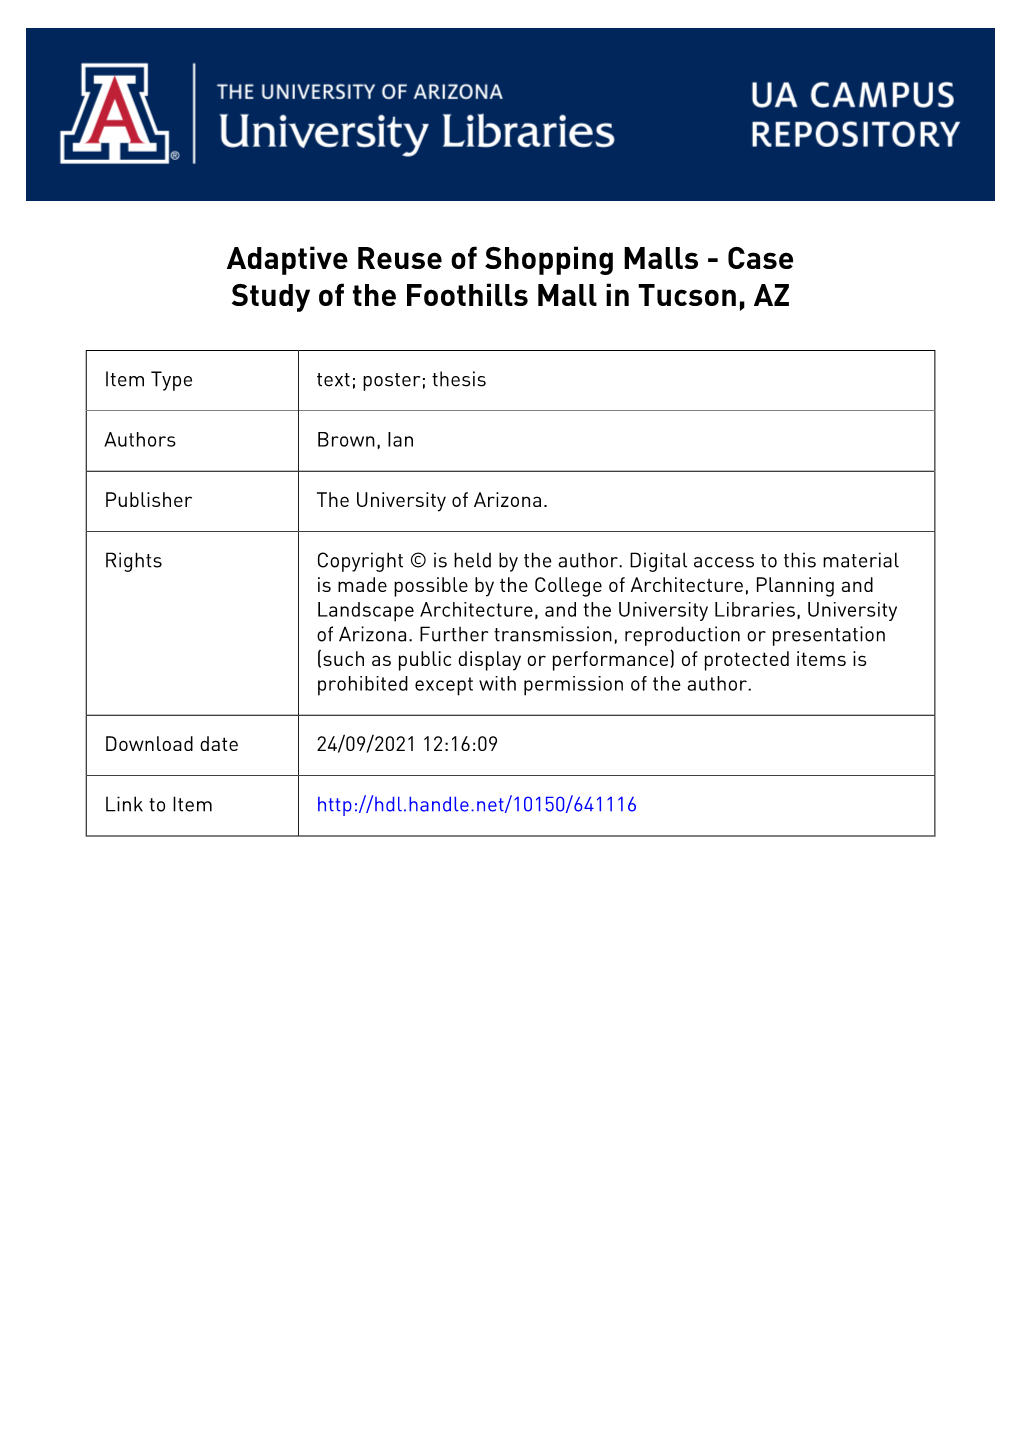 Adaptive Reuse of Shopping Malls: Case Study of the Foothills Mall in Tucson Page 2 of 43